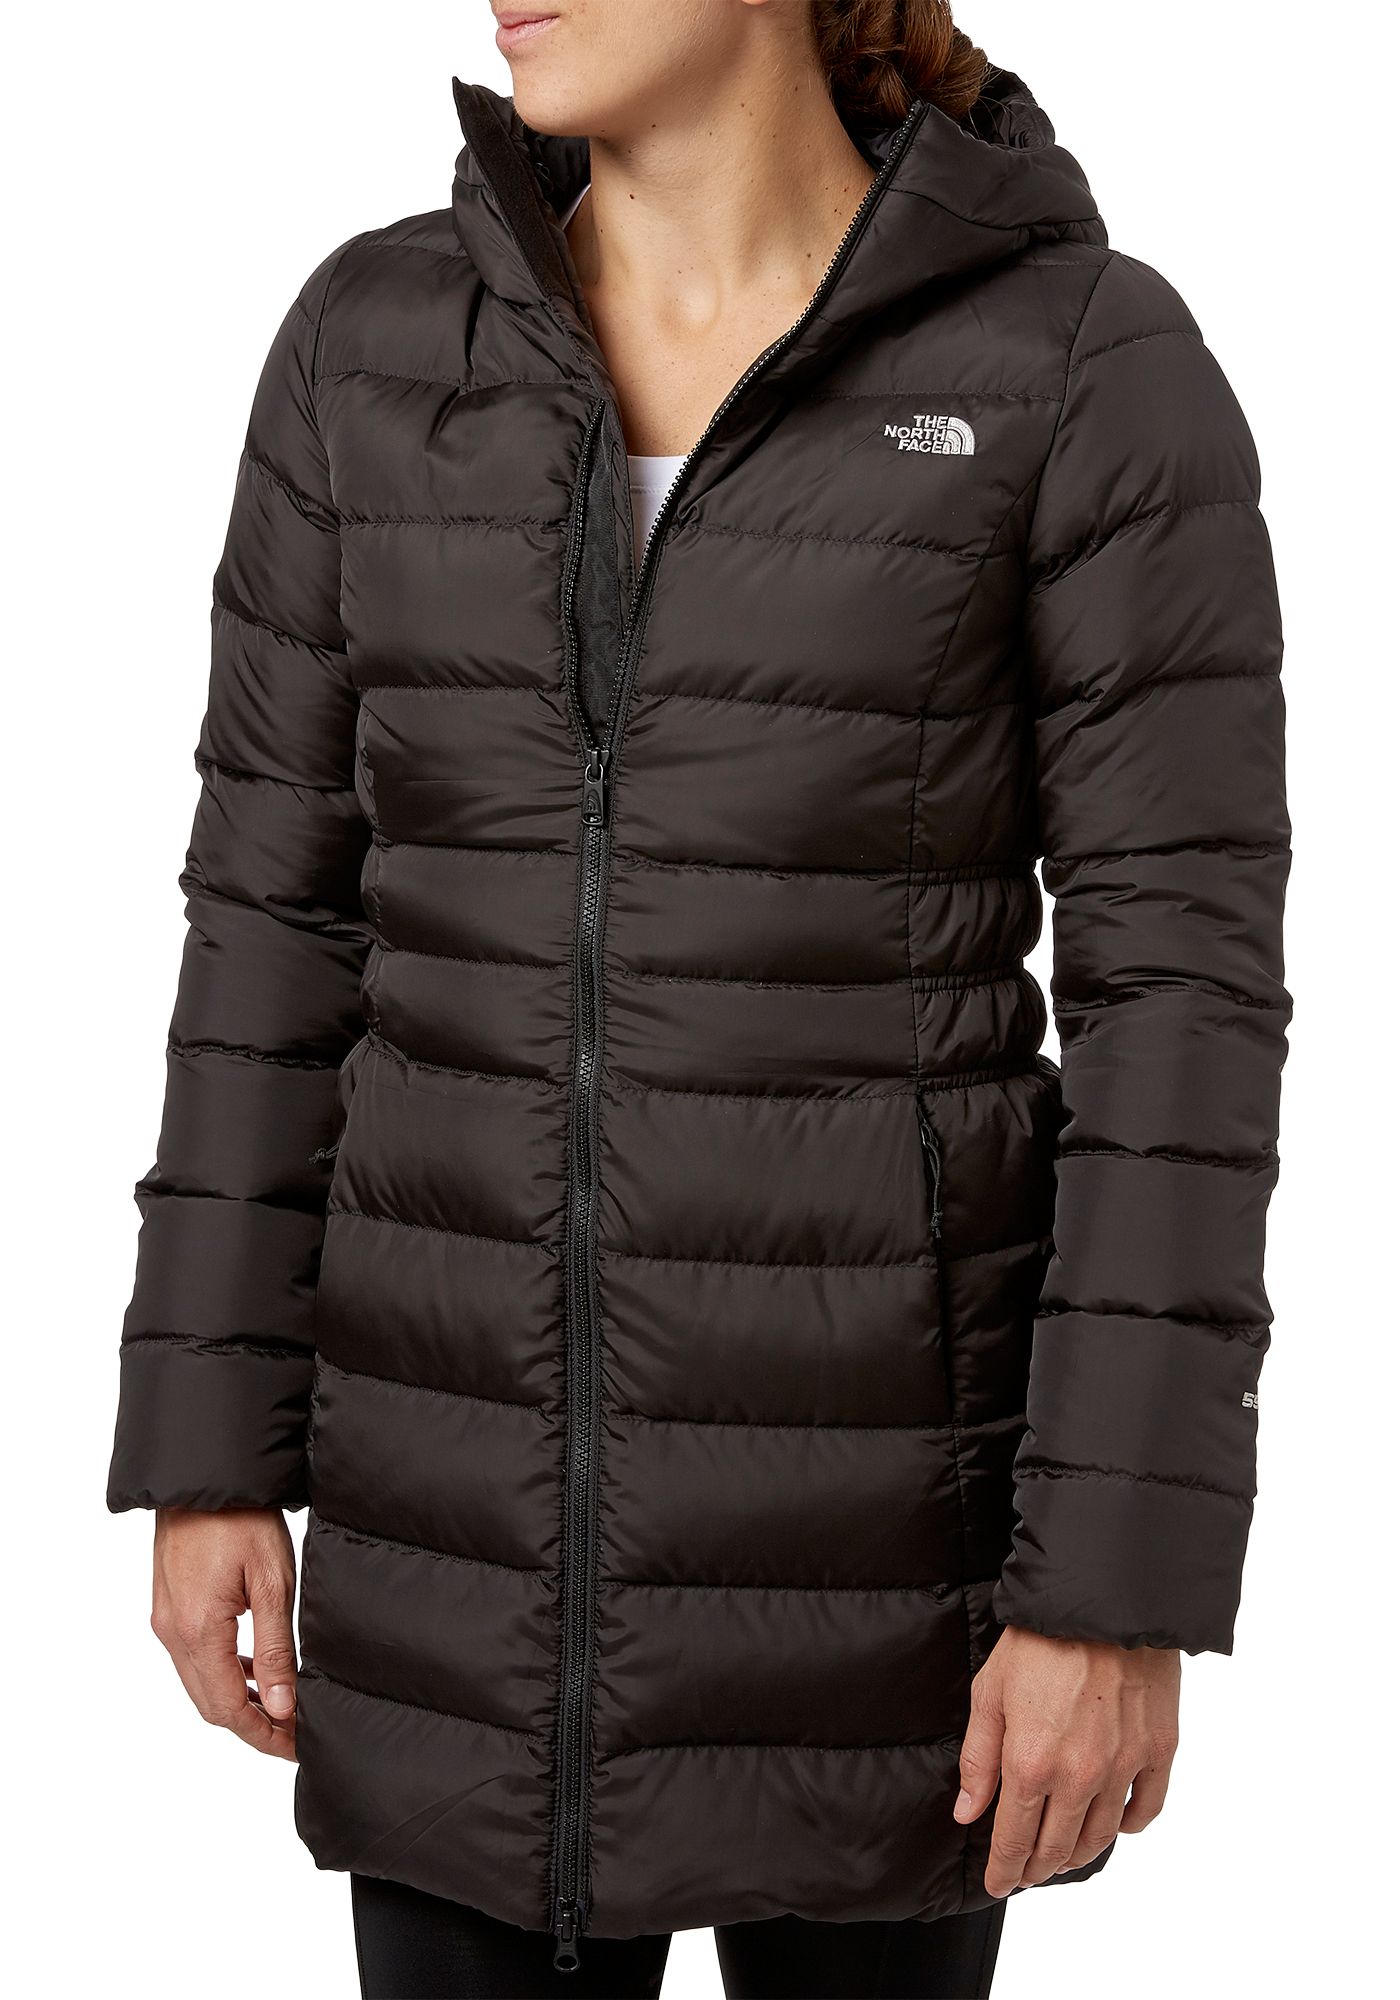 The North Face Women's Gotham II Down Parka | DICK'S Sporting Goods